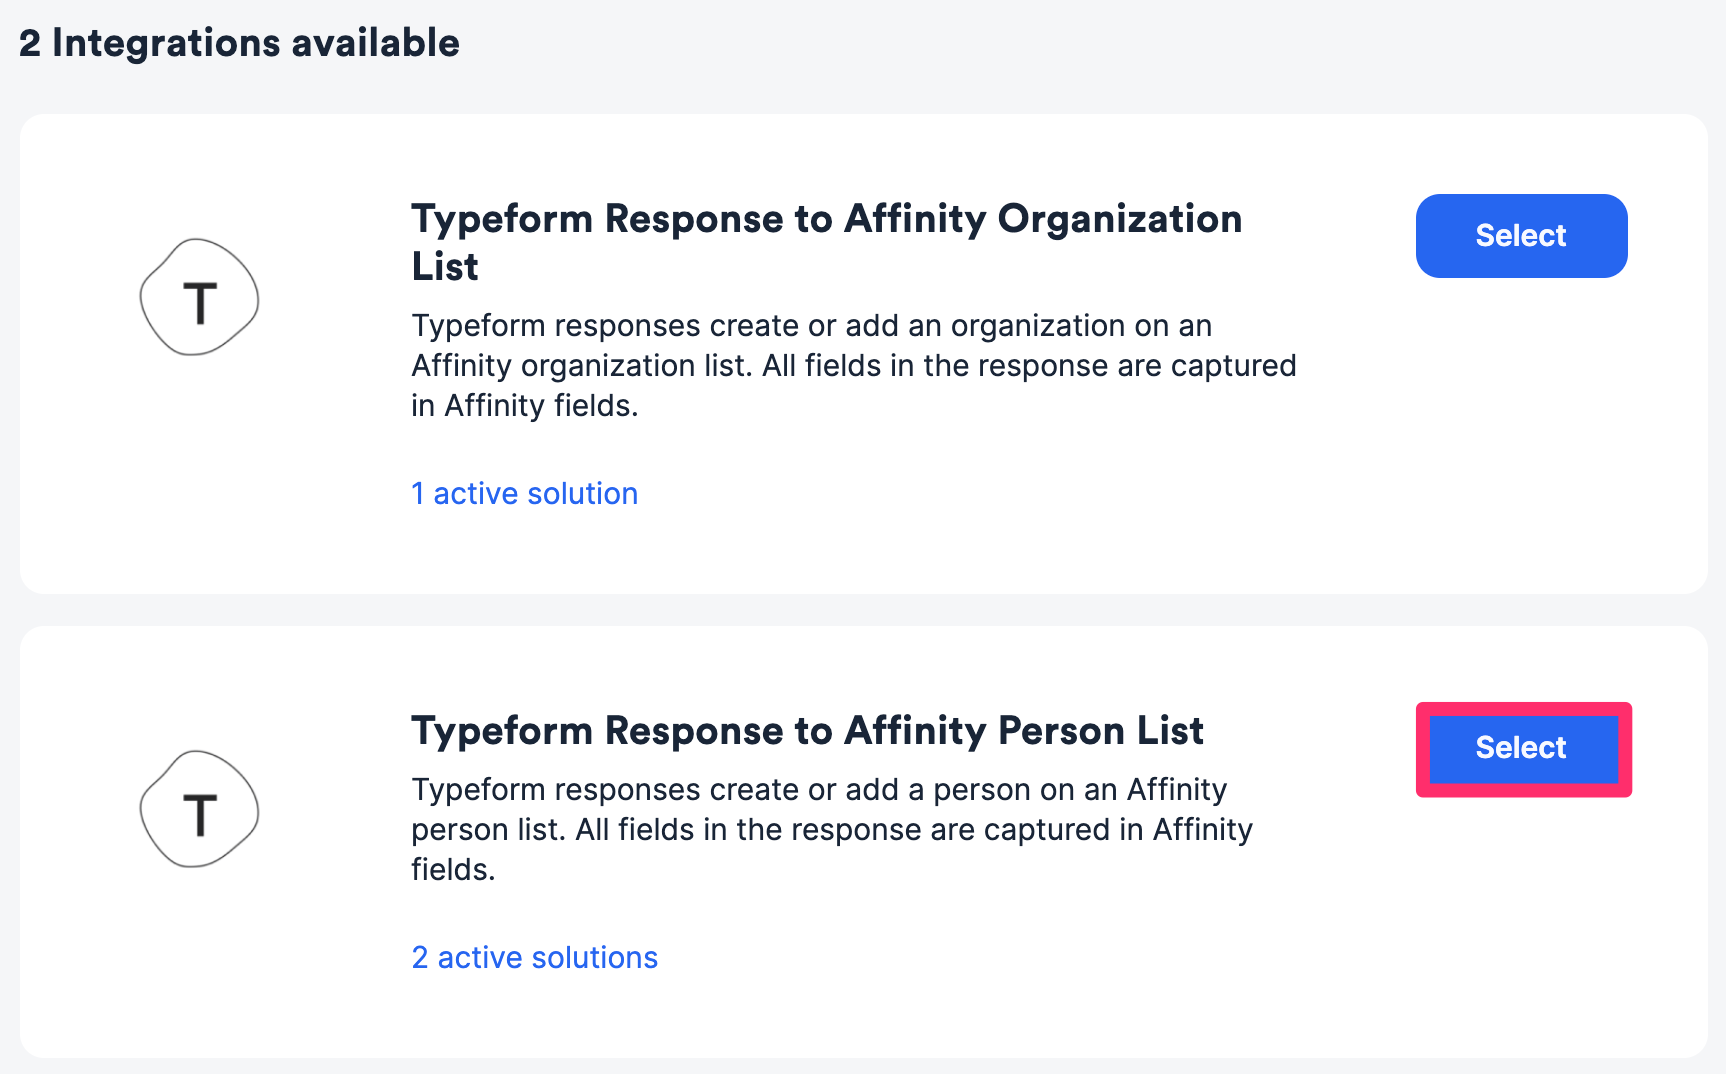 Typeform_to_Affinity_Person_List.png